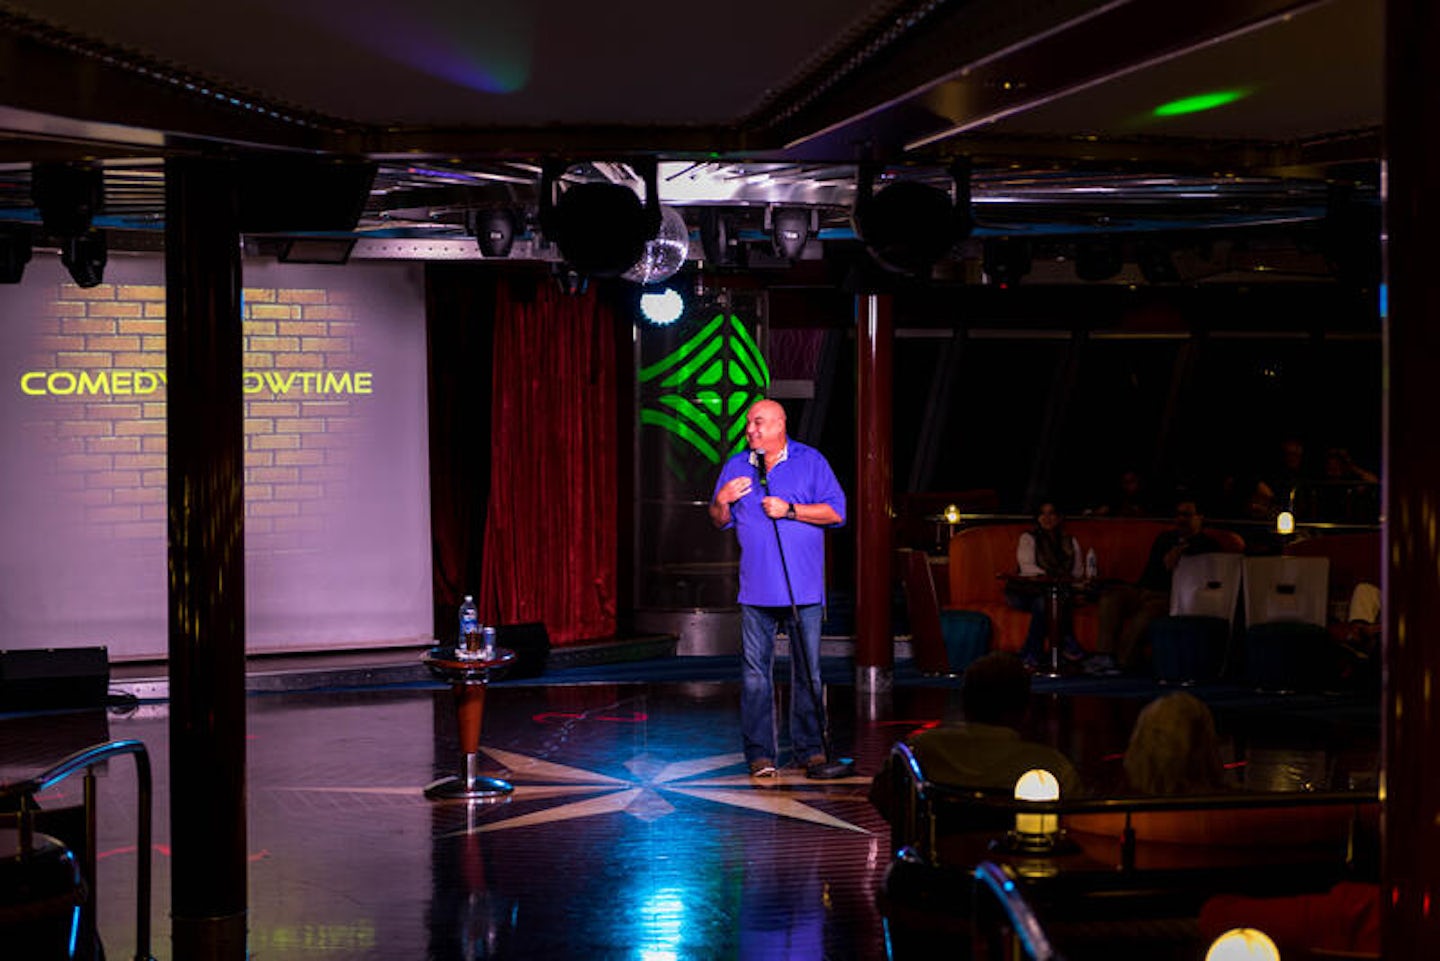 Adult Comedy Show at Spinnaker Lounge on Norwegian Pearl